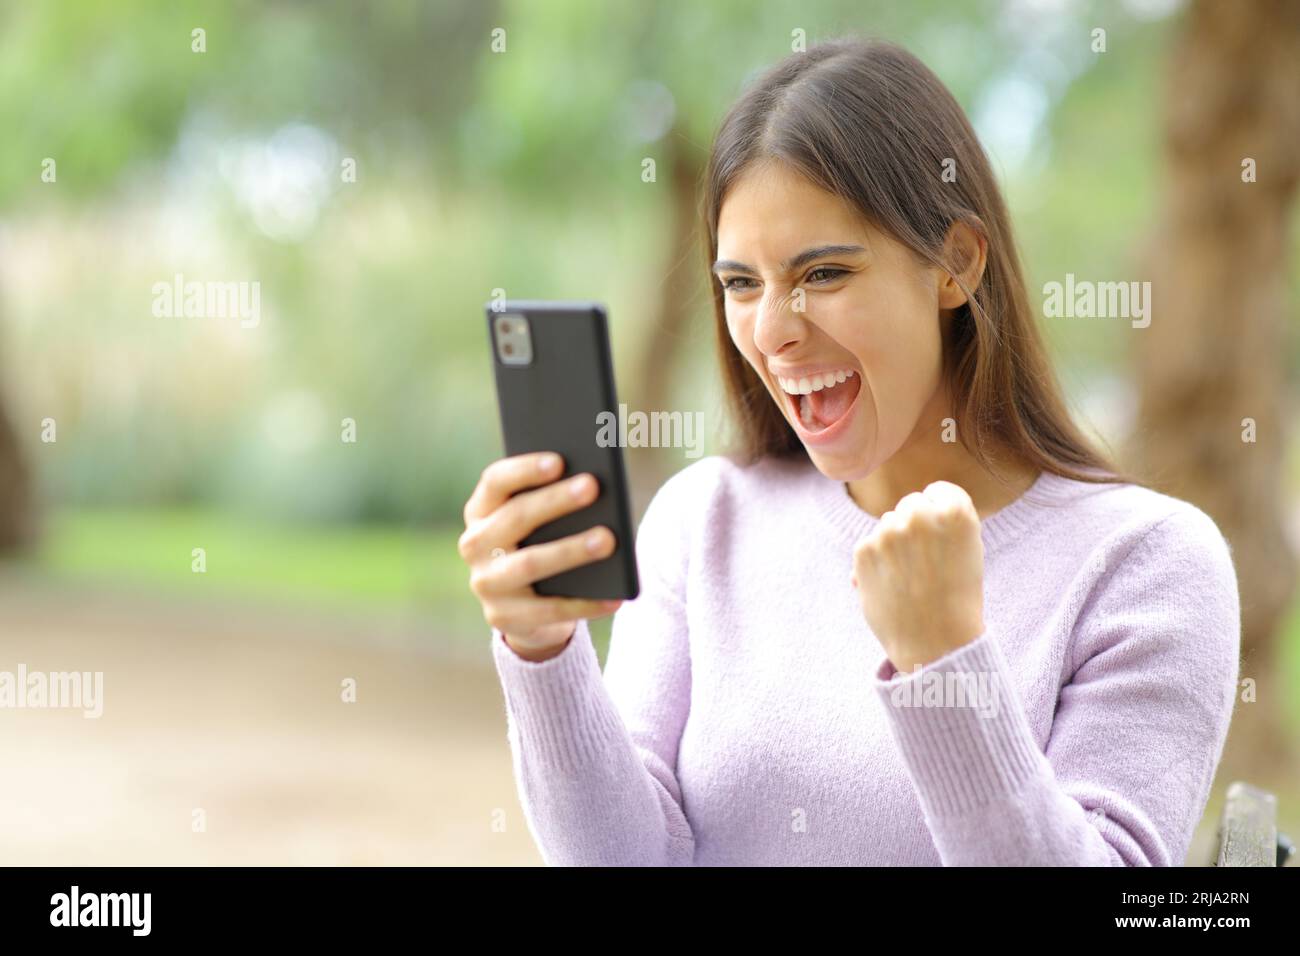 Excited woman celebrating good news watching phone content in a park Stock Photo